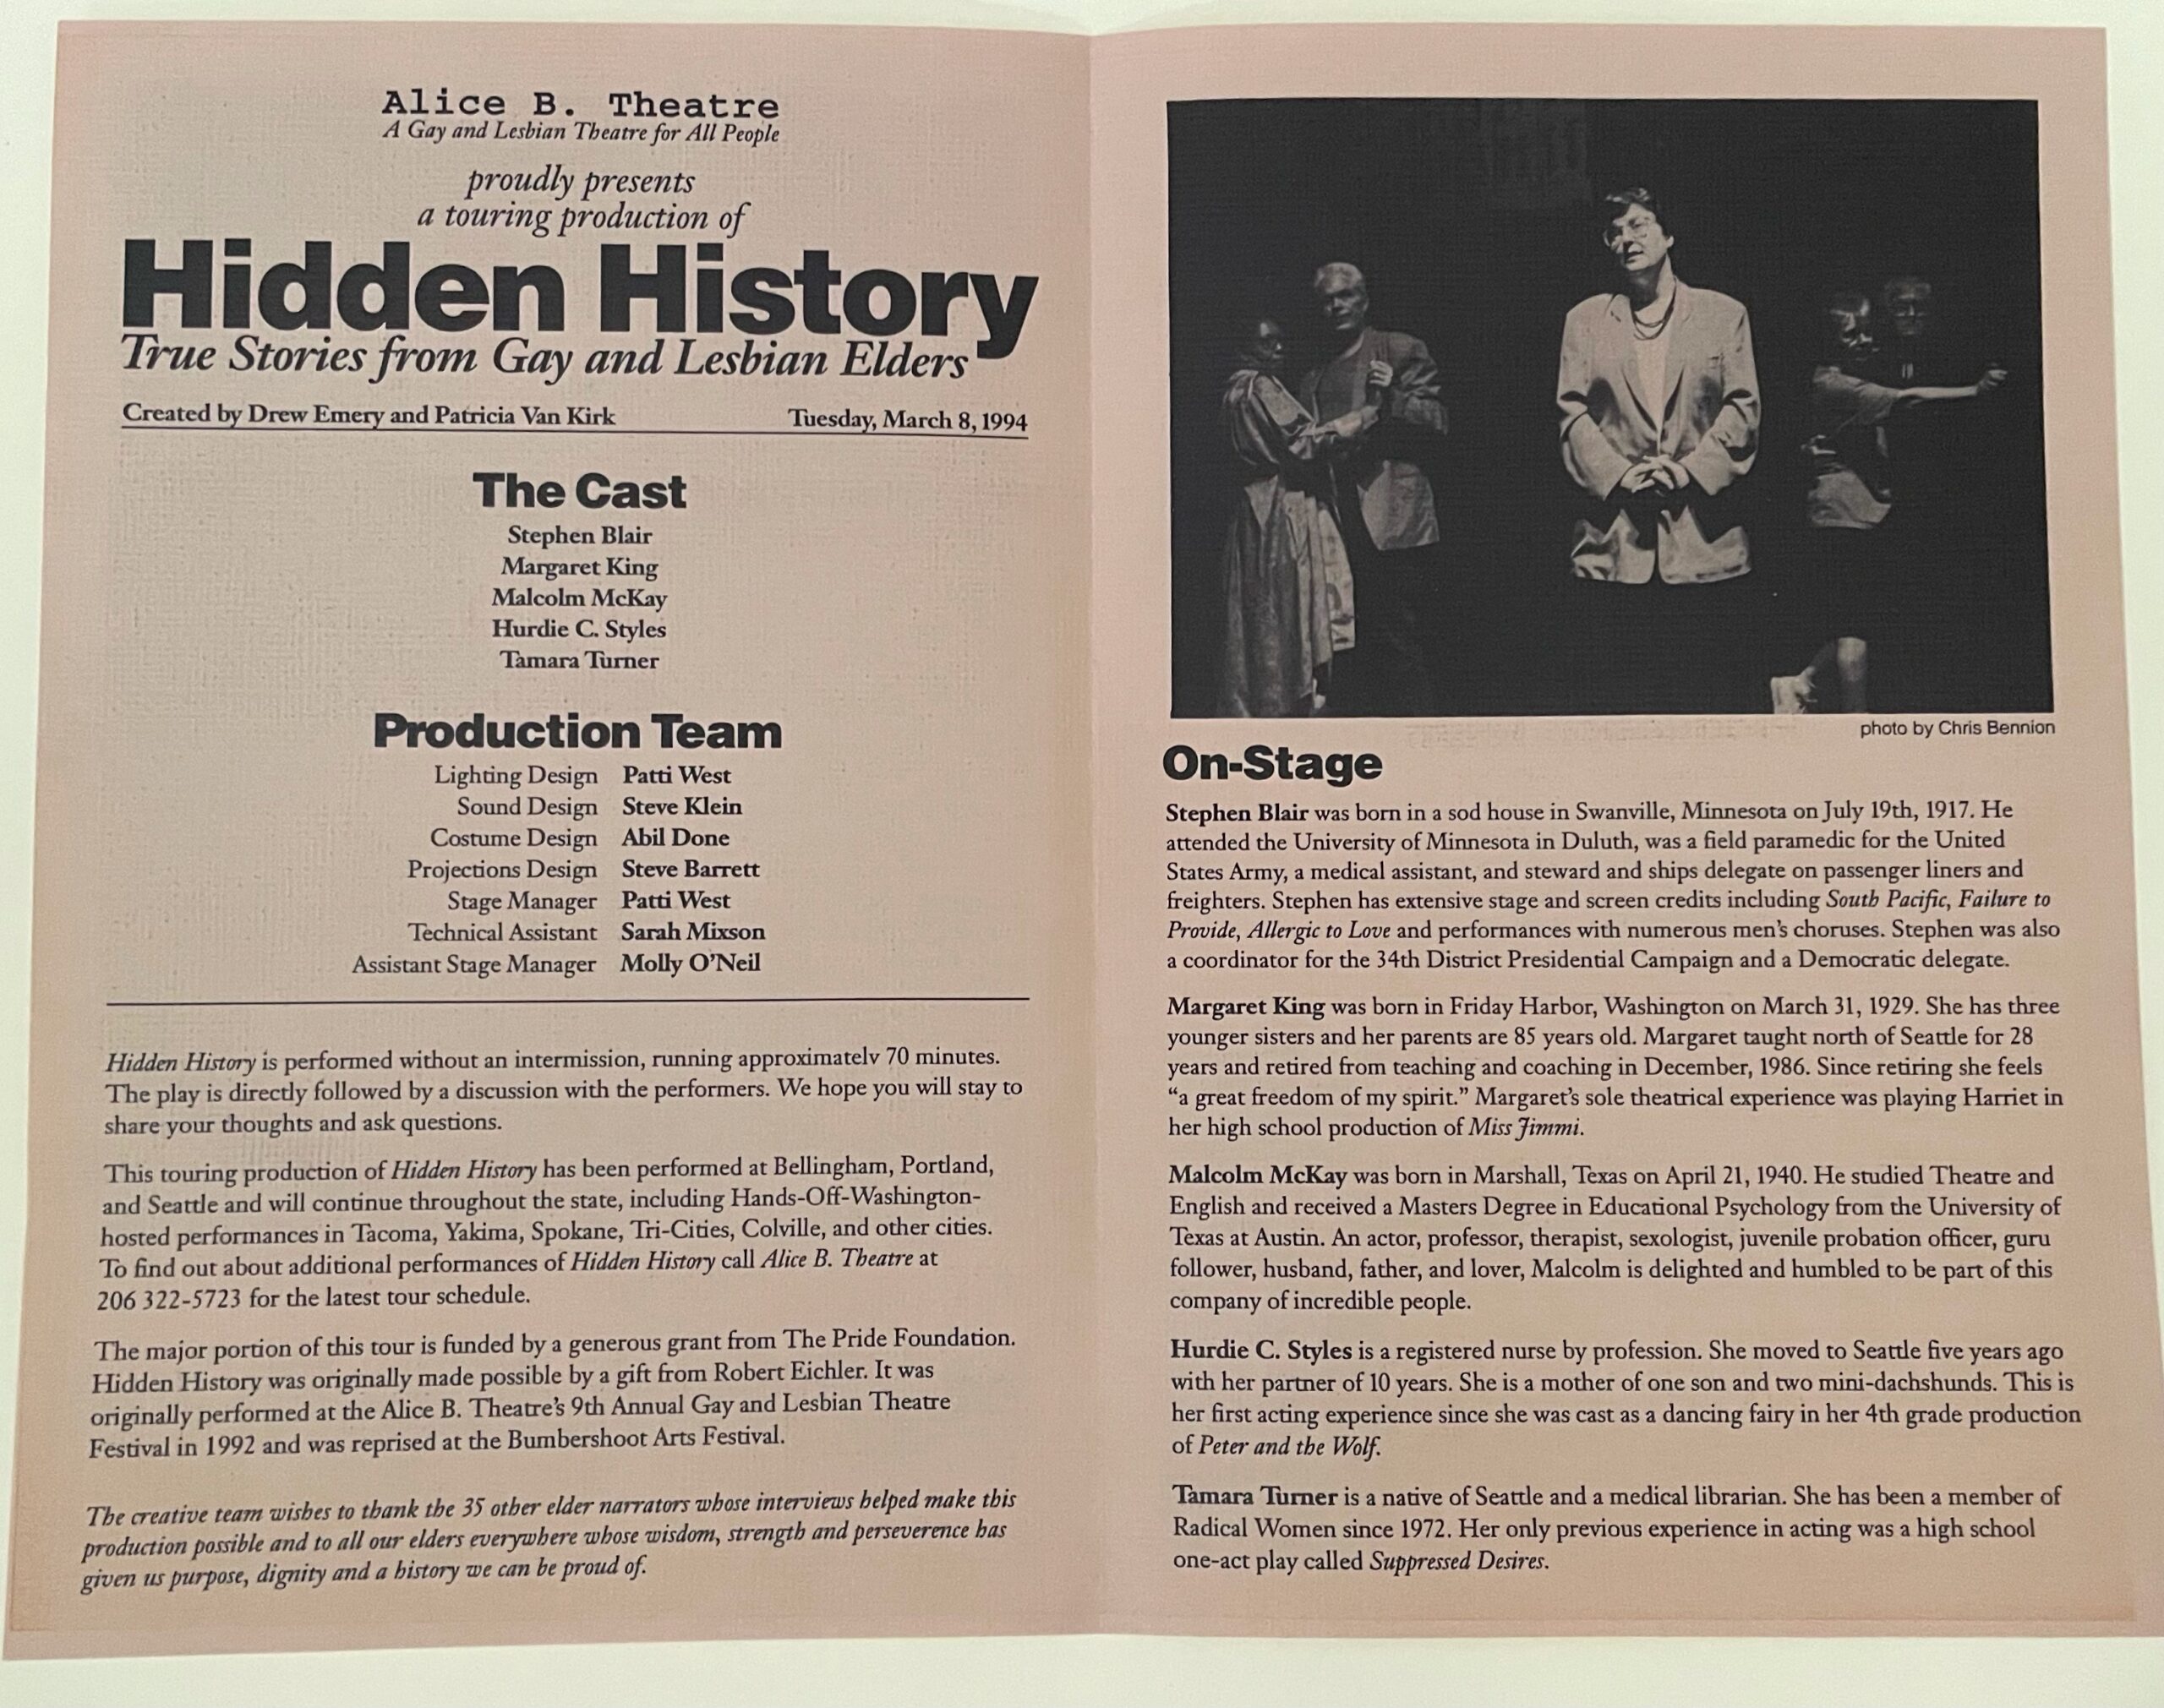 Description of the play and cast from the "Hidden History" program (1994)